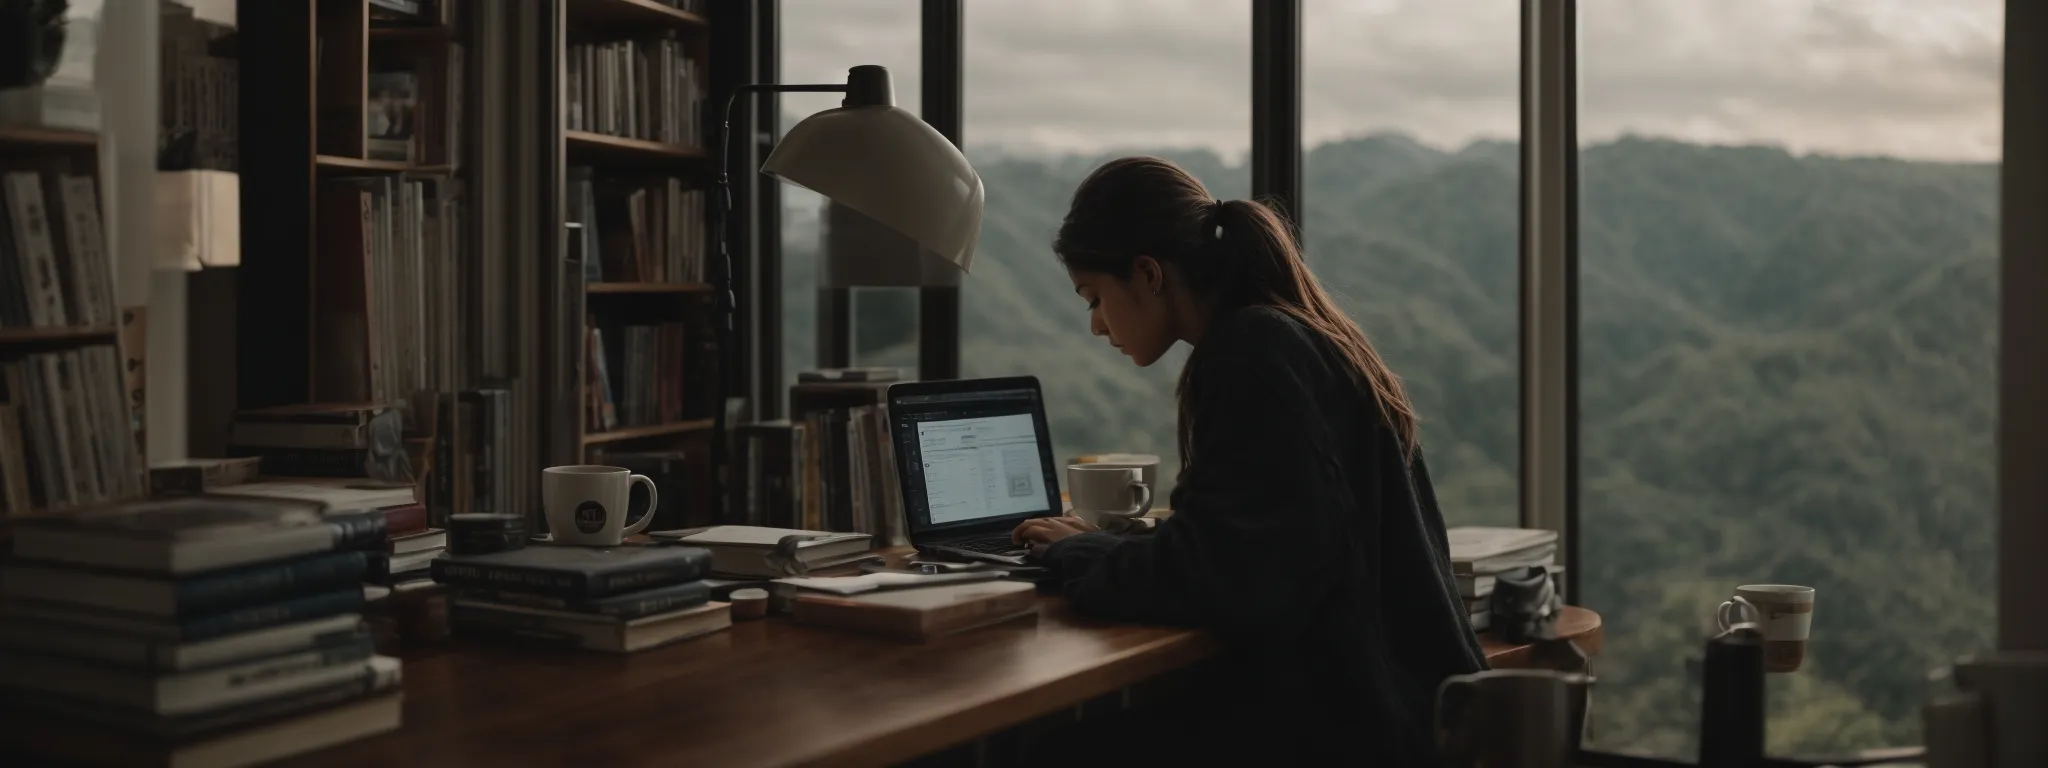 a person thoughtfully typing on a laptop, surrounded by books and a cup of coffee, with a serene view through a nearby window.